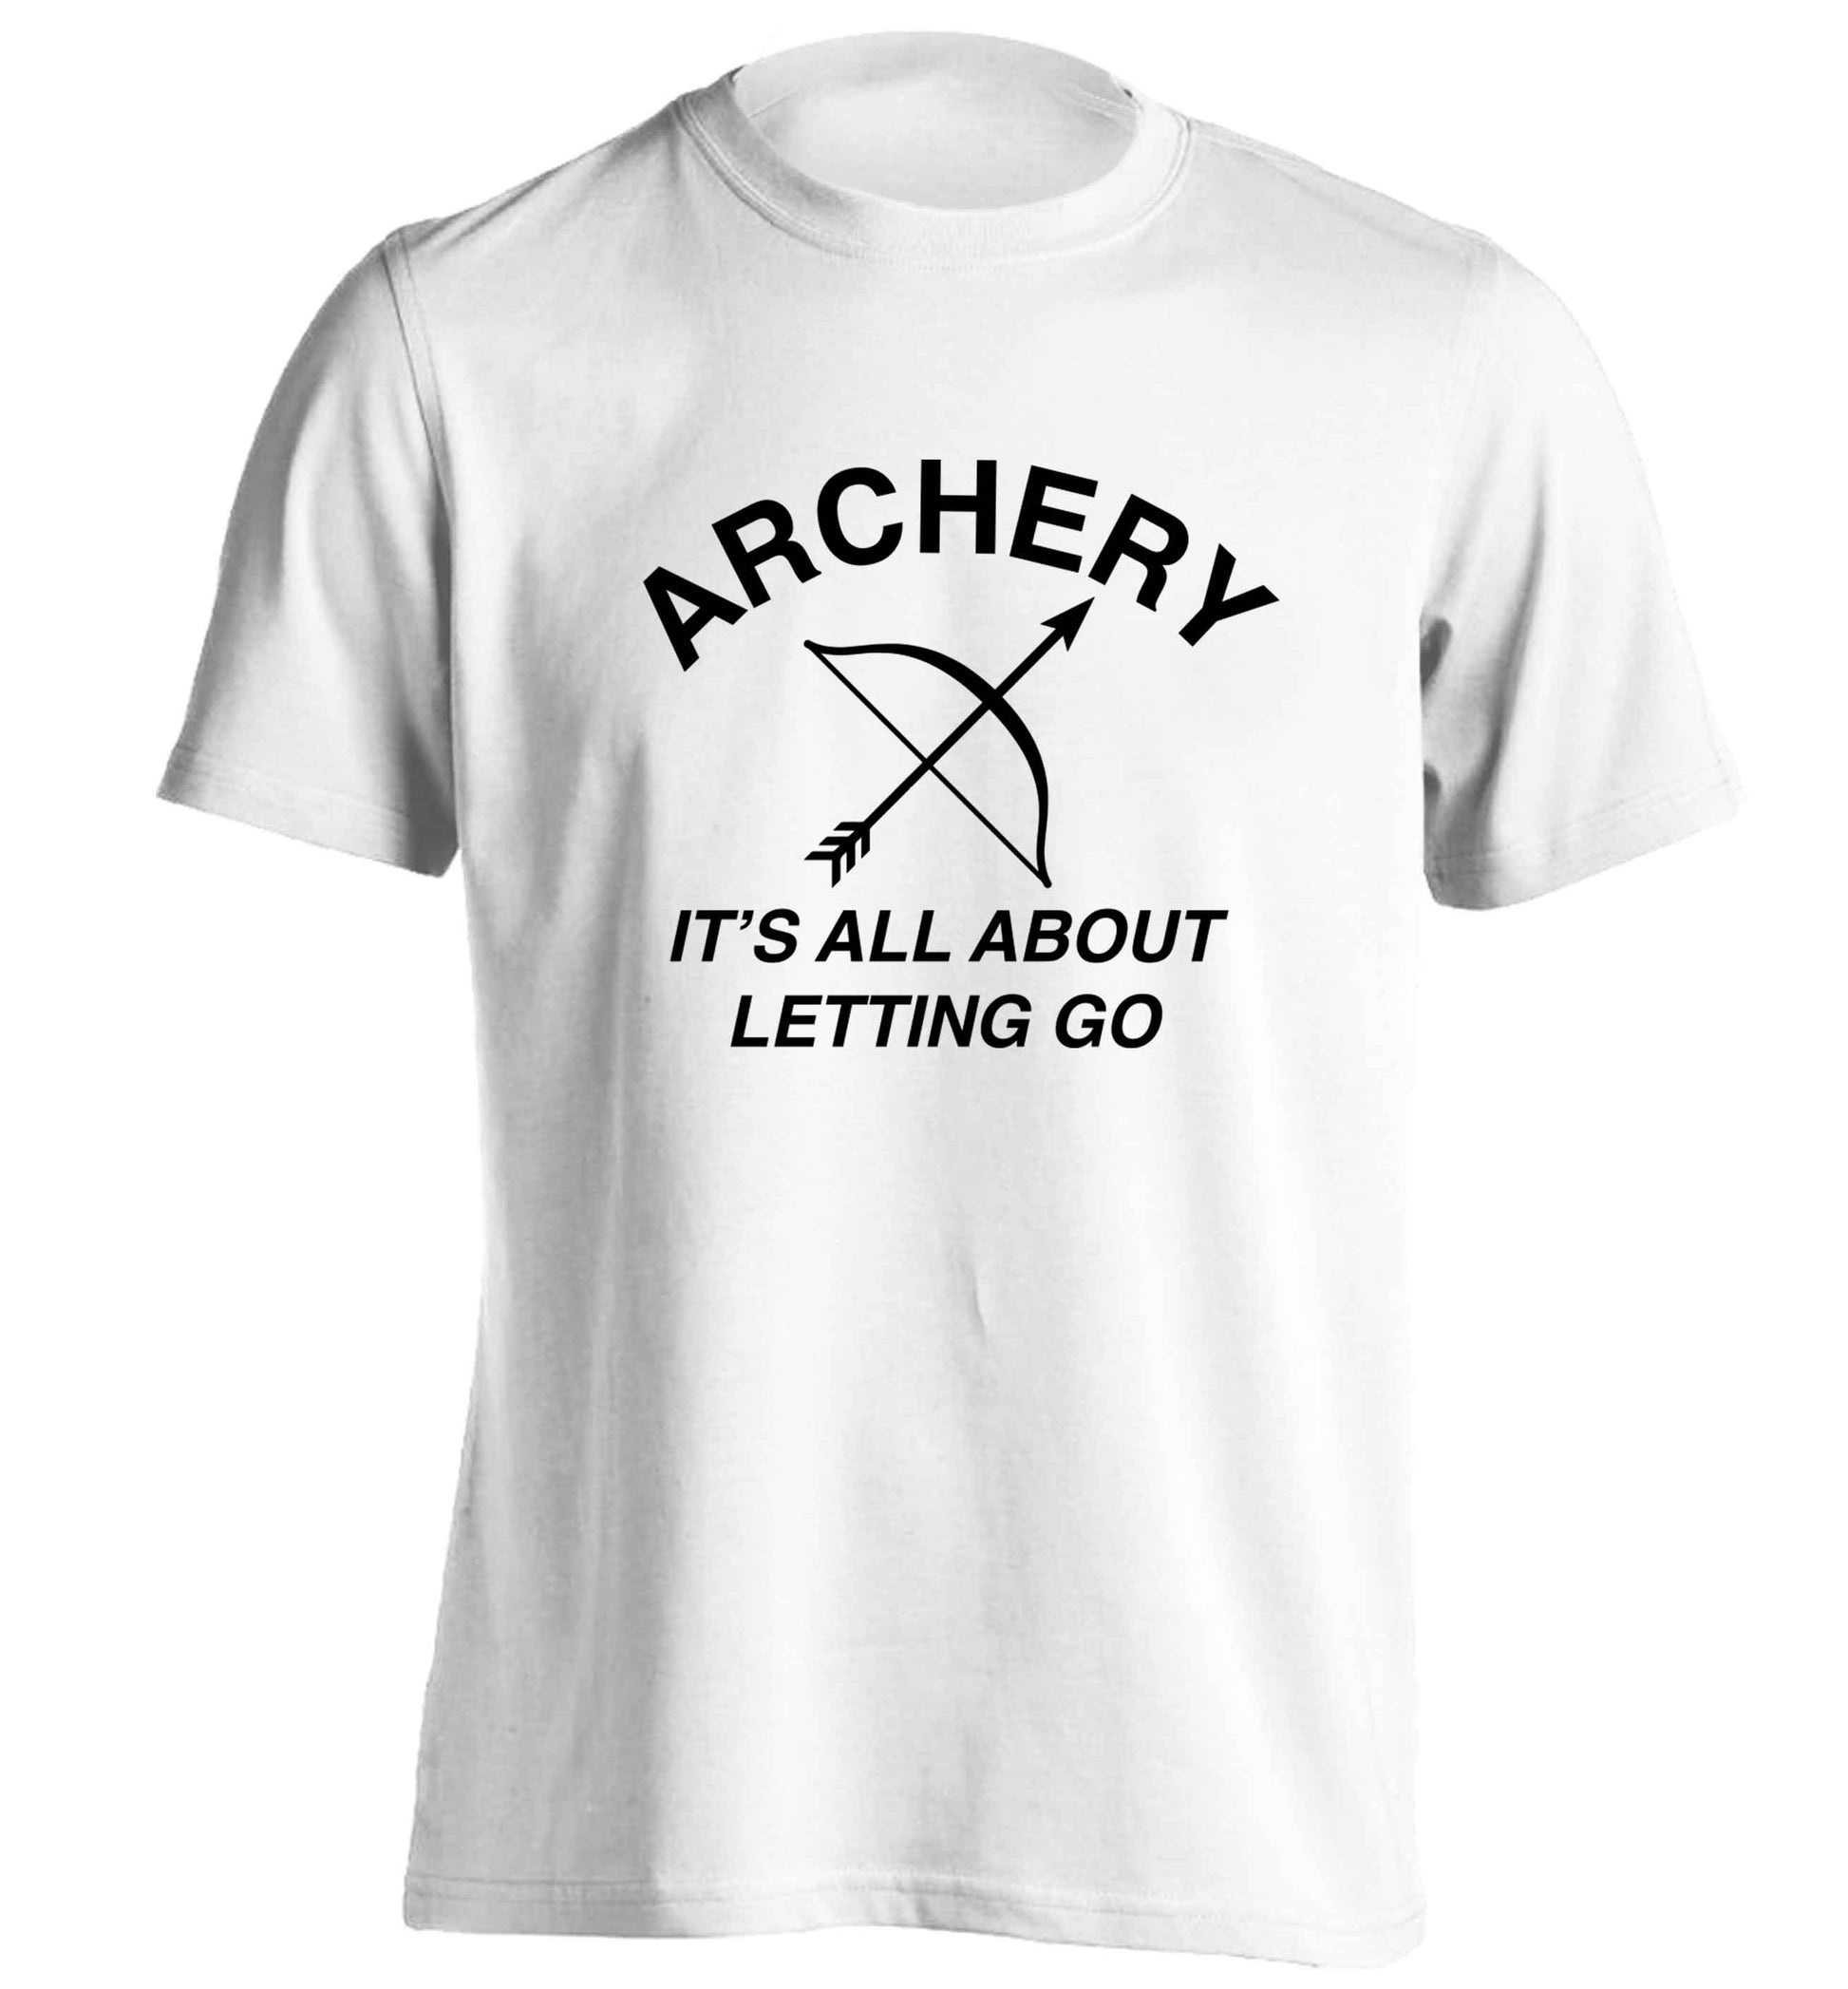 Archery it's all about letting go adults unisex white Tshirt 2XL